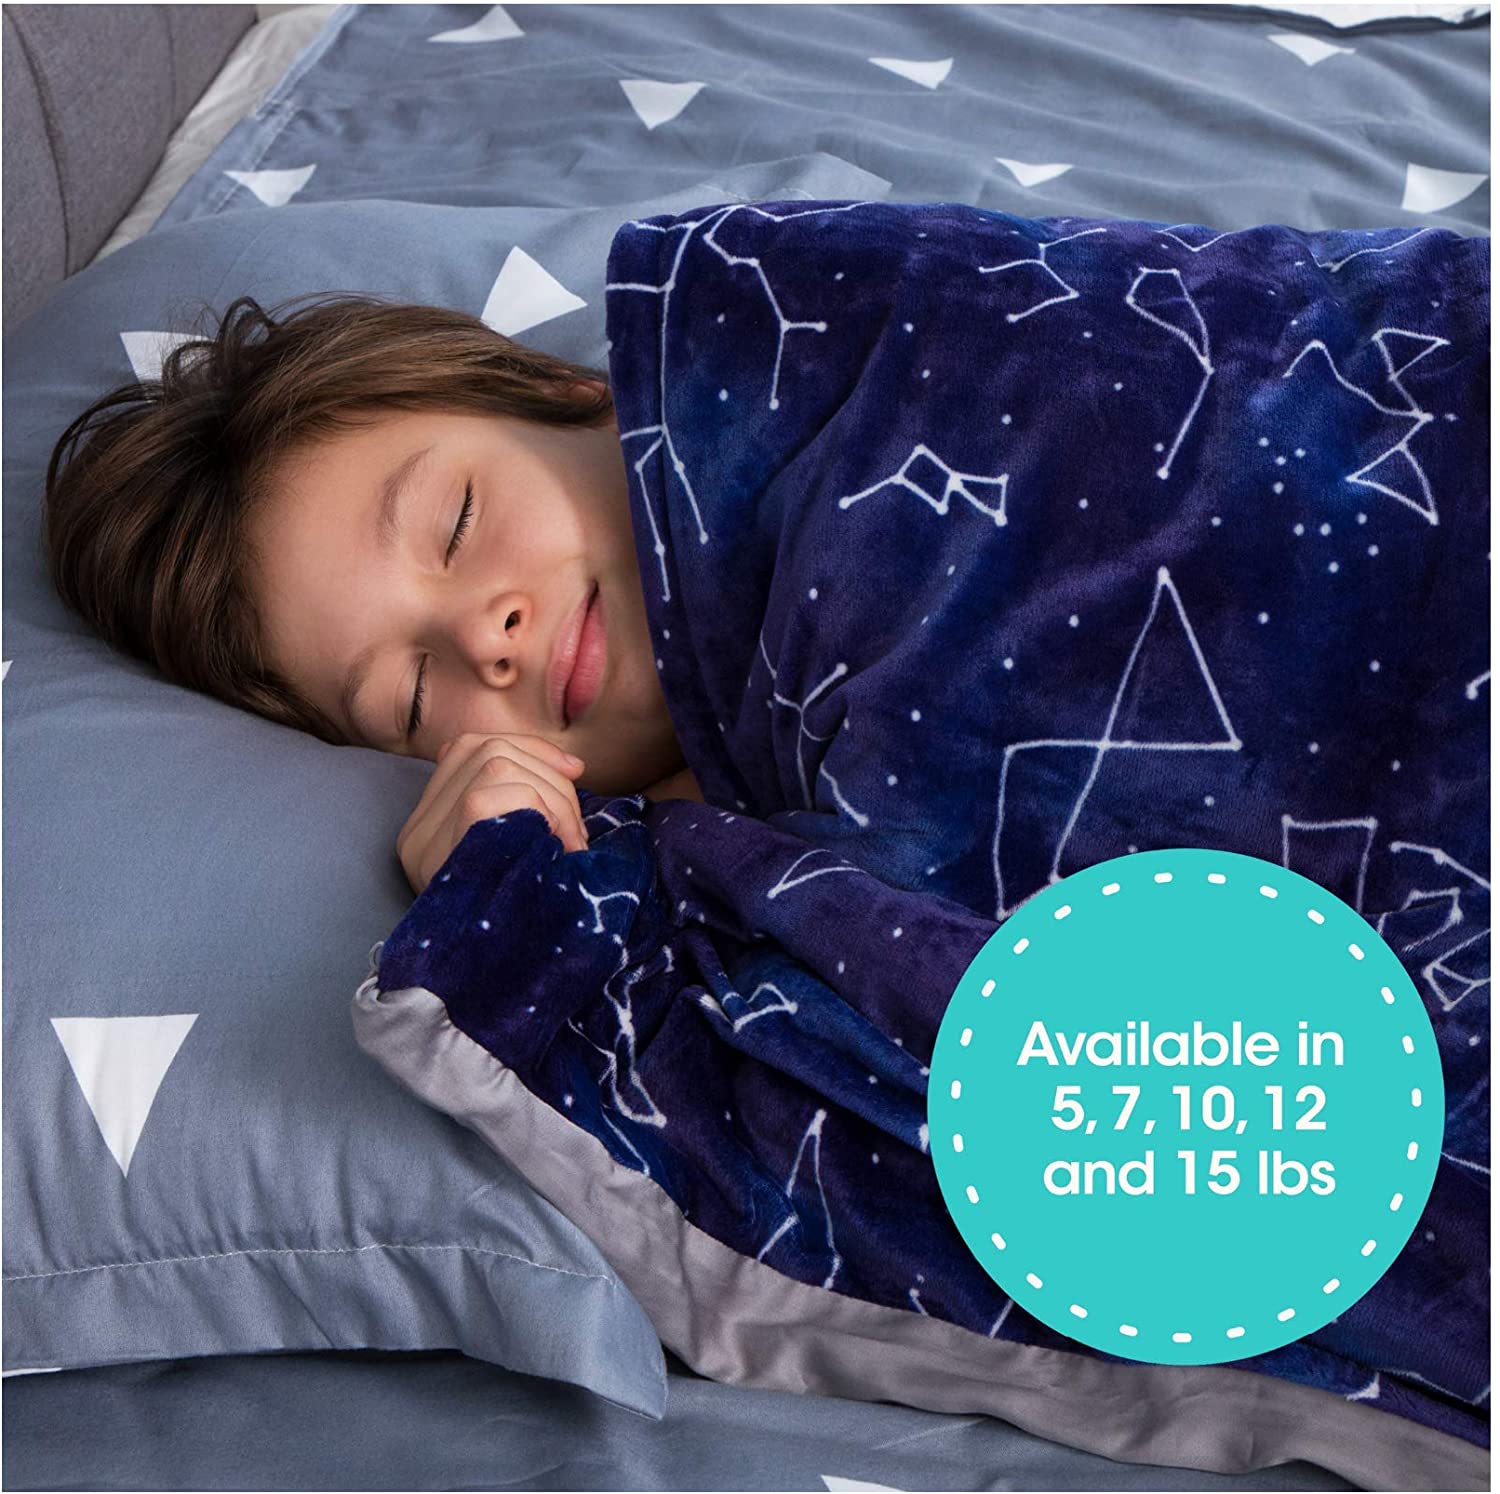 Florensi Weighted Blanket for Kids with Removable Bamboo Duvet Cover (7 Lbs & 41